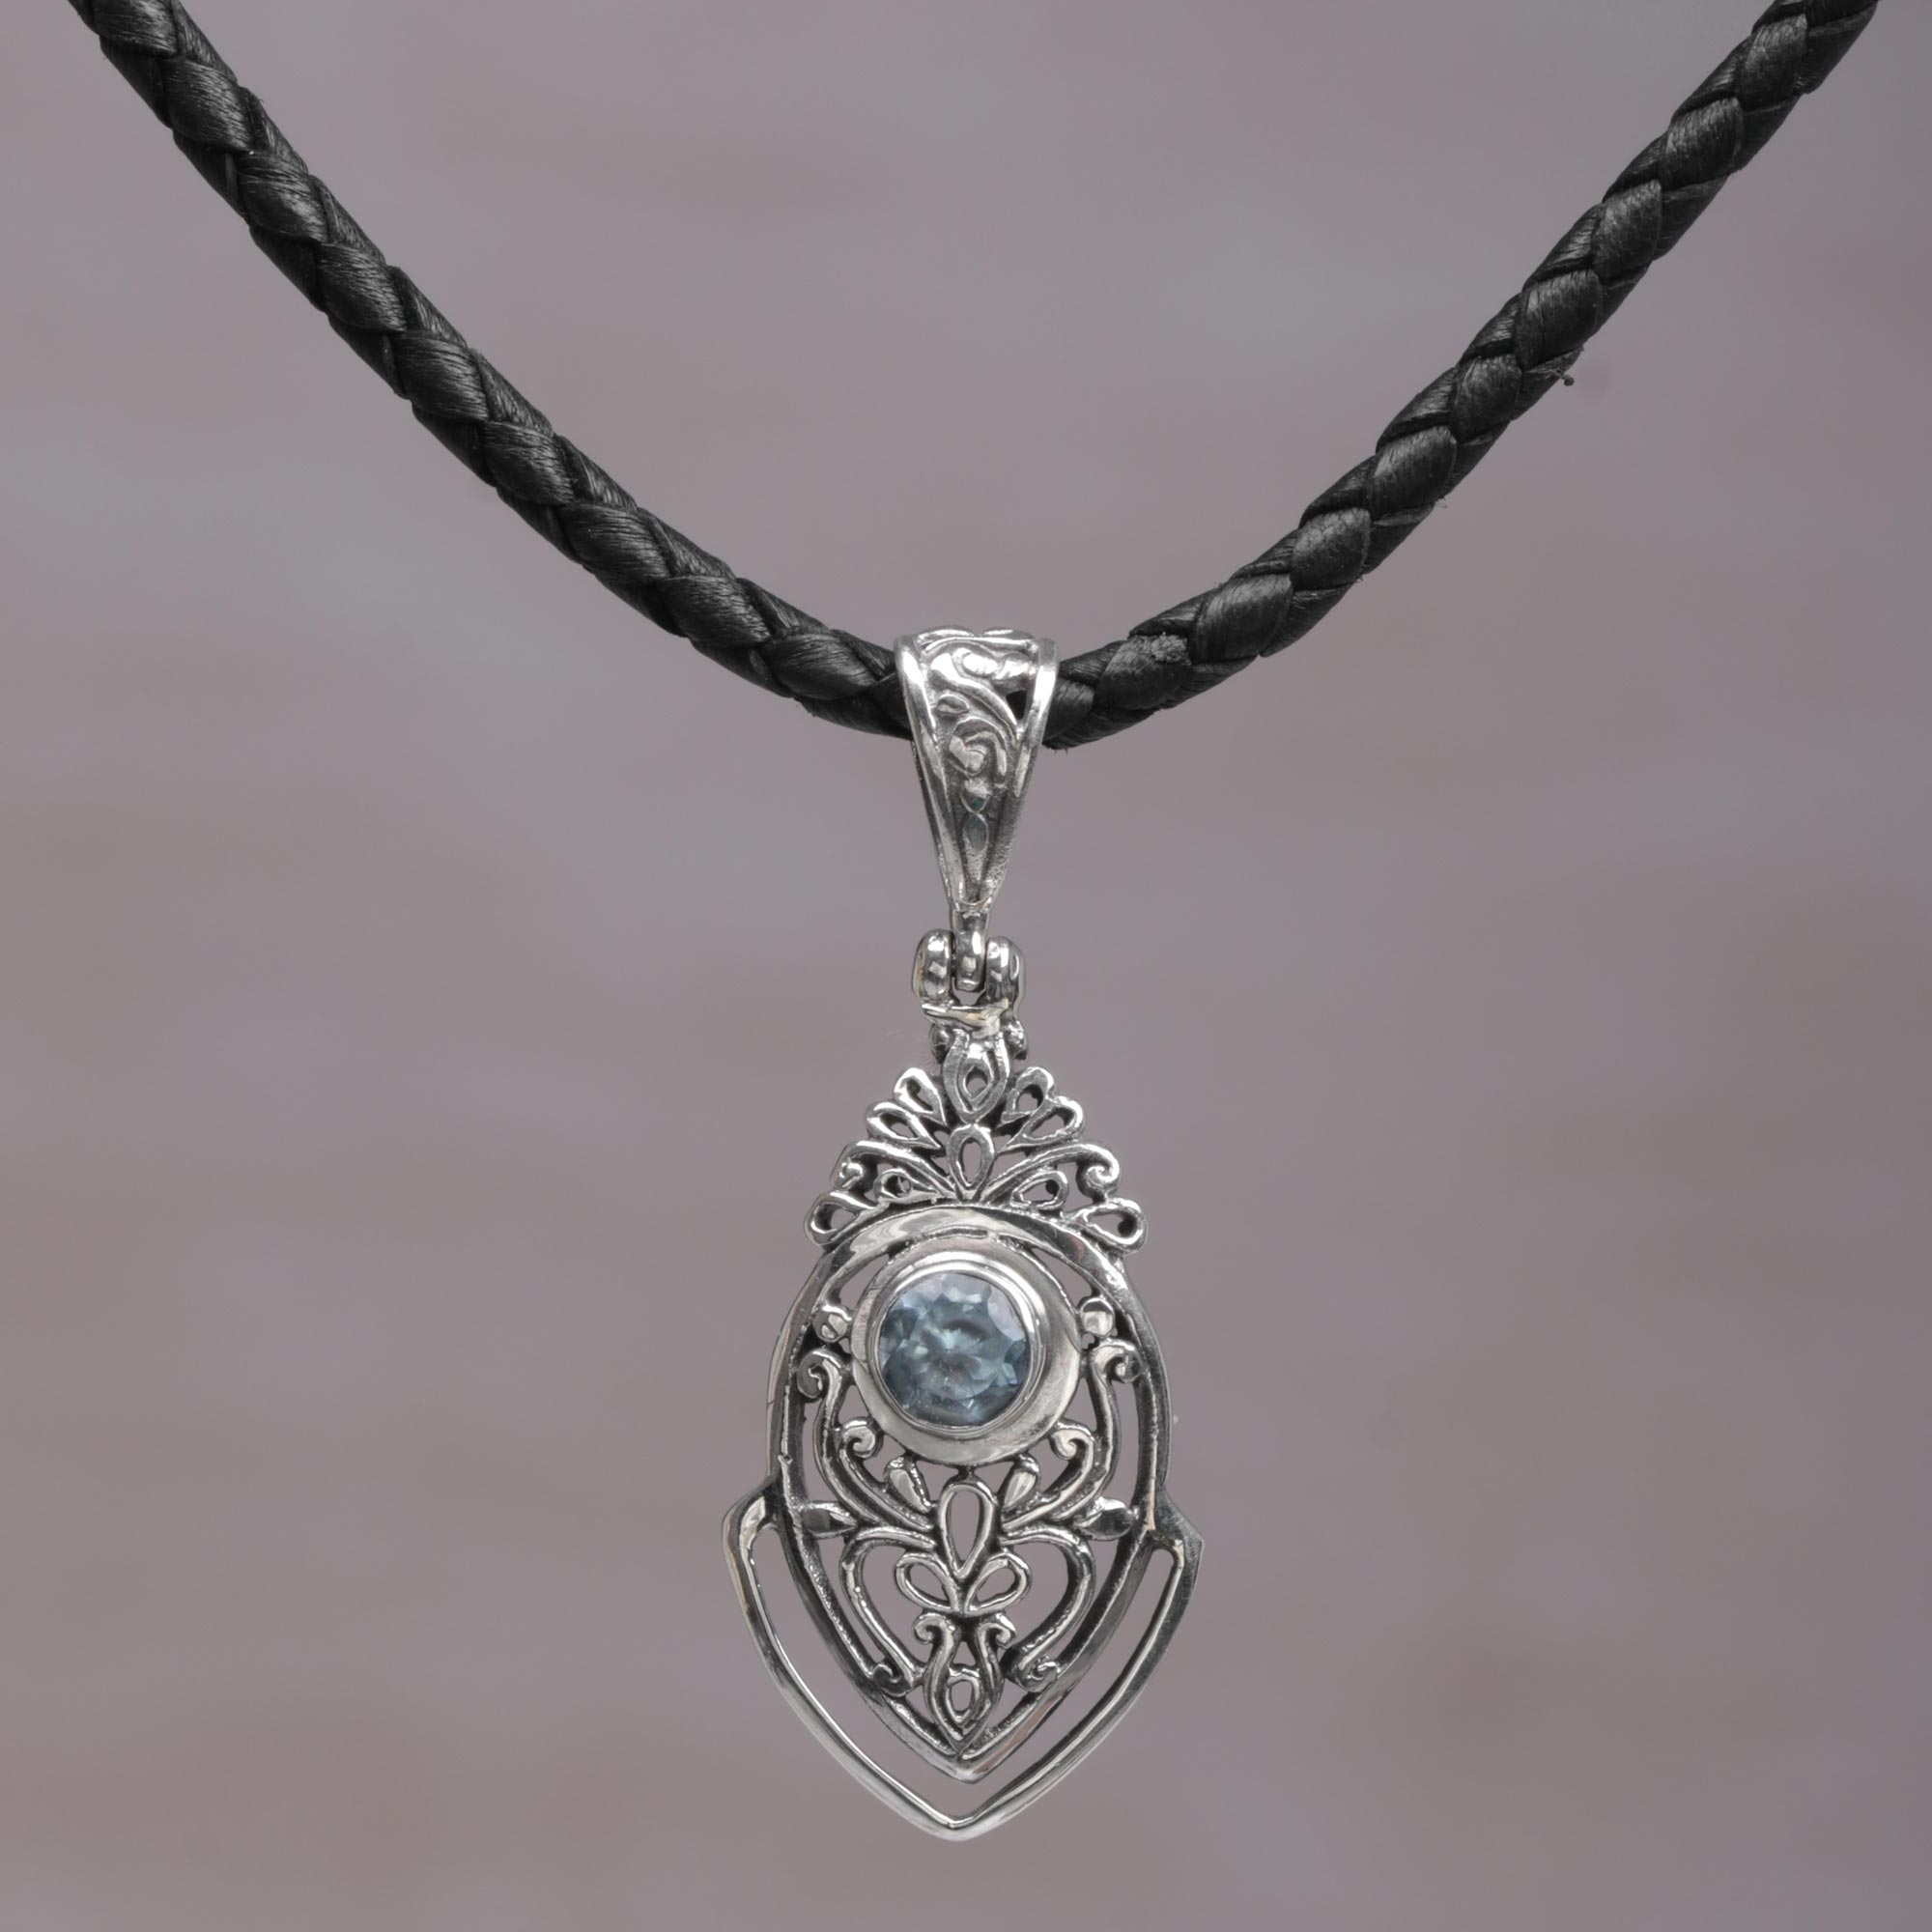 Bali Sterling Silver and Leather Necklace with Blue Topaz - Bali Amulet ...